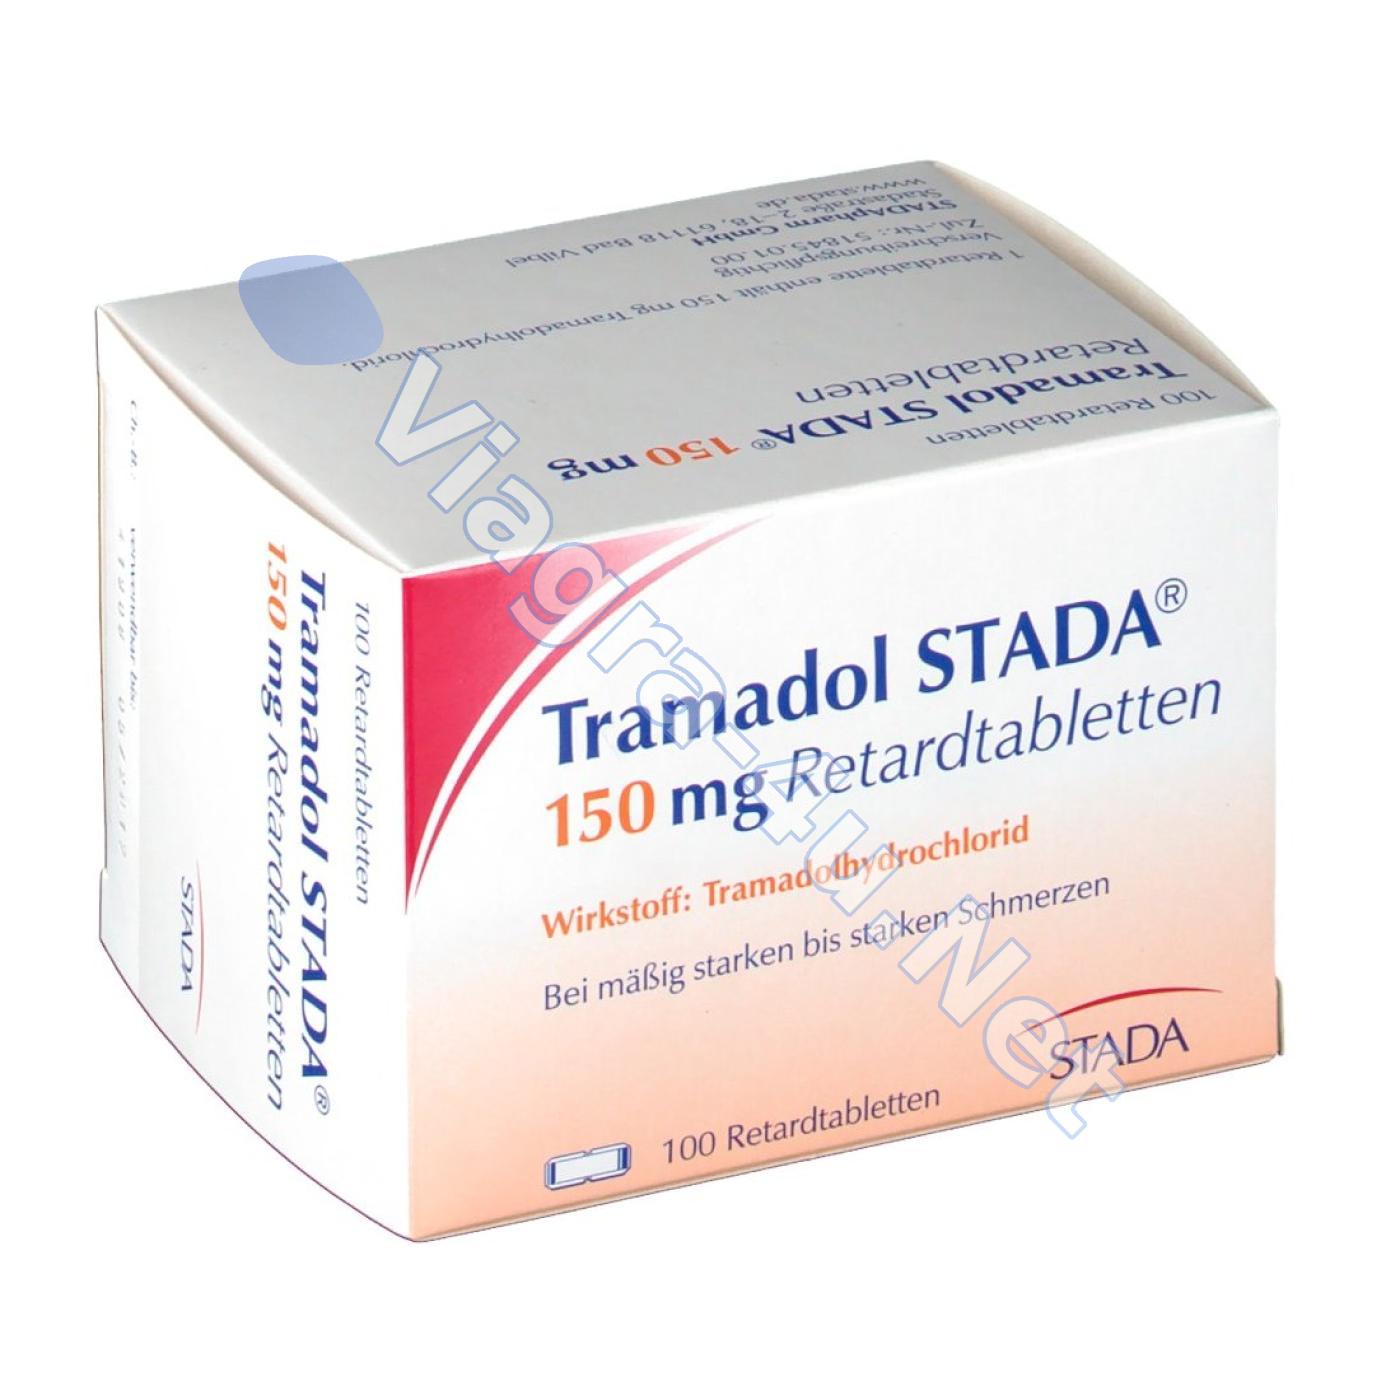 purchasing tramadol without md prescription diet